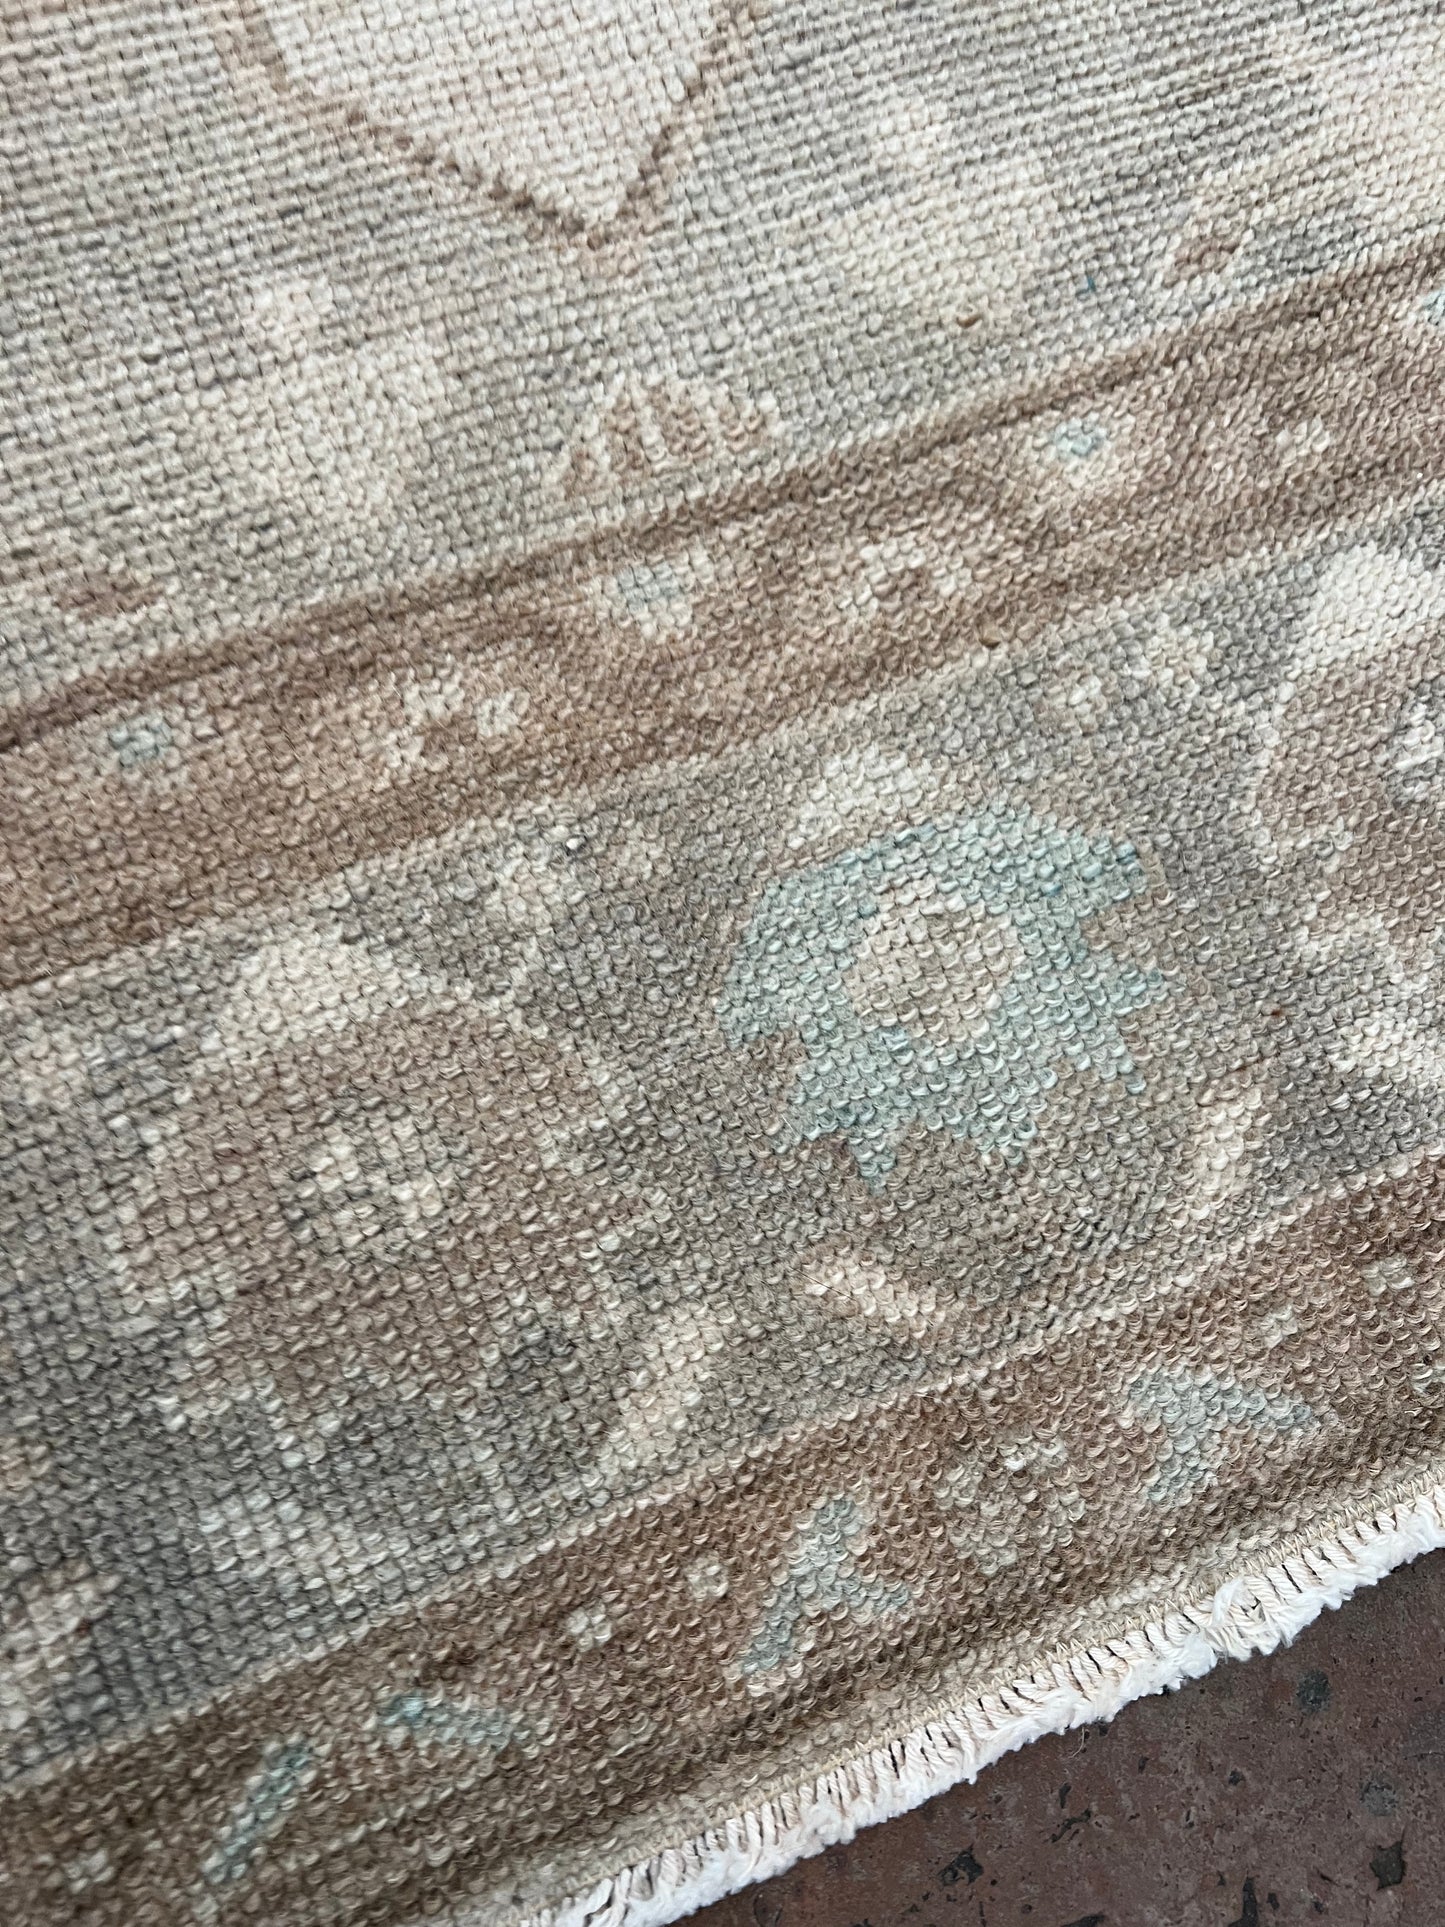 2'9" x 12'2" Rug Runner with Taupe and Gray